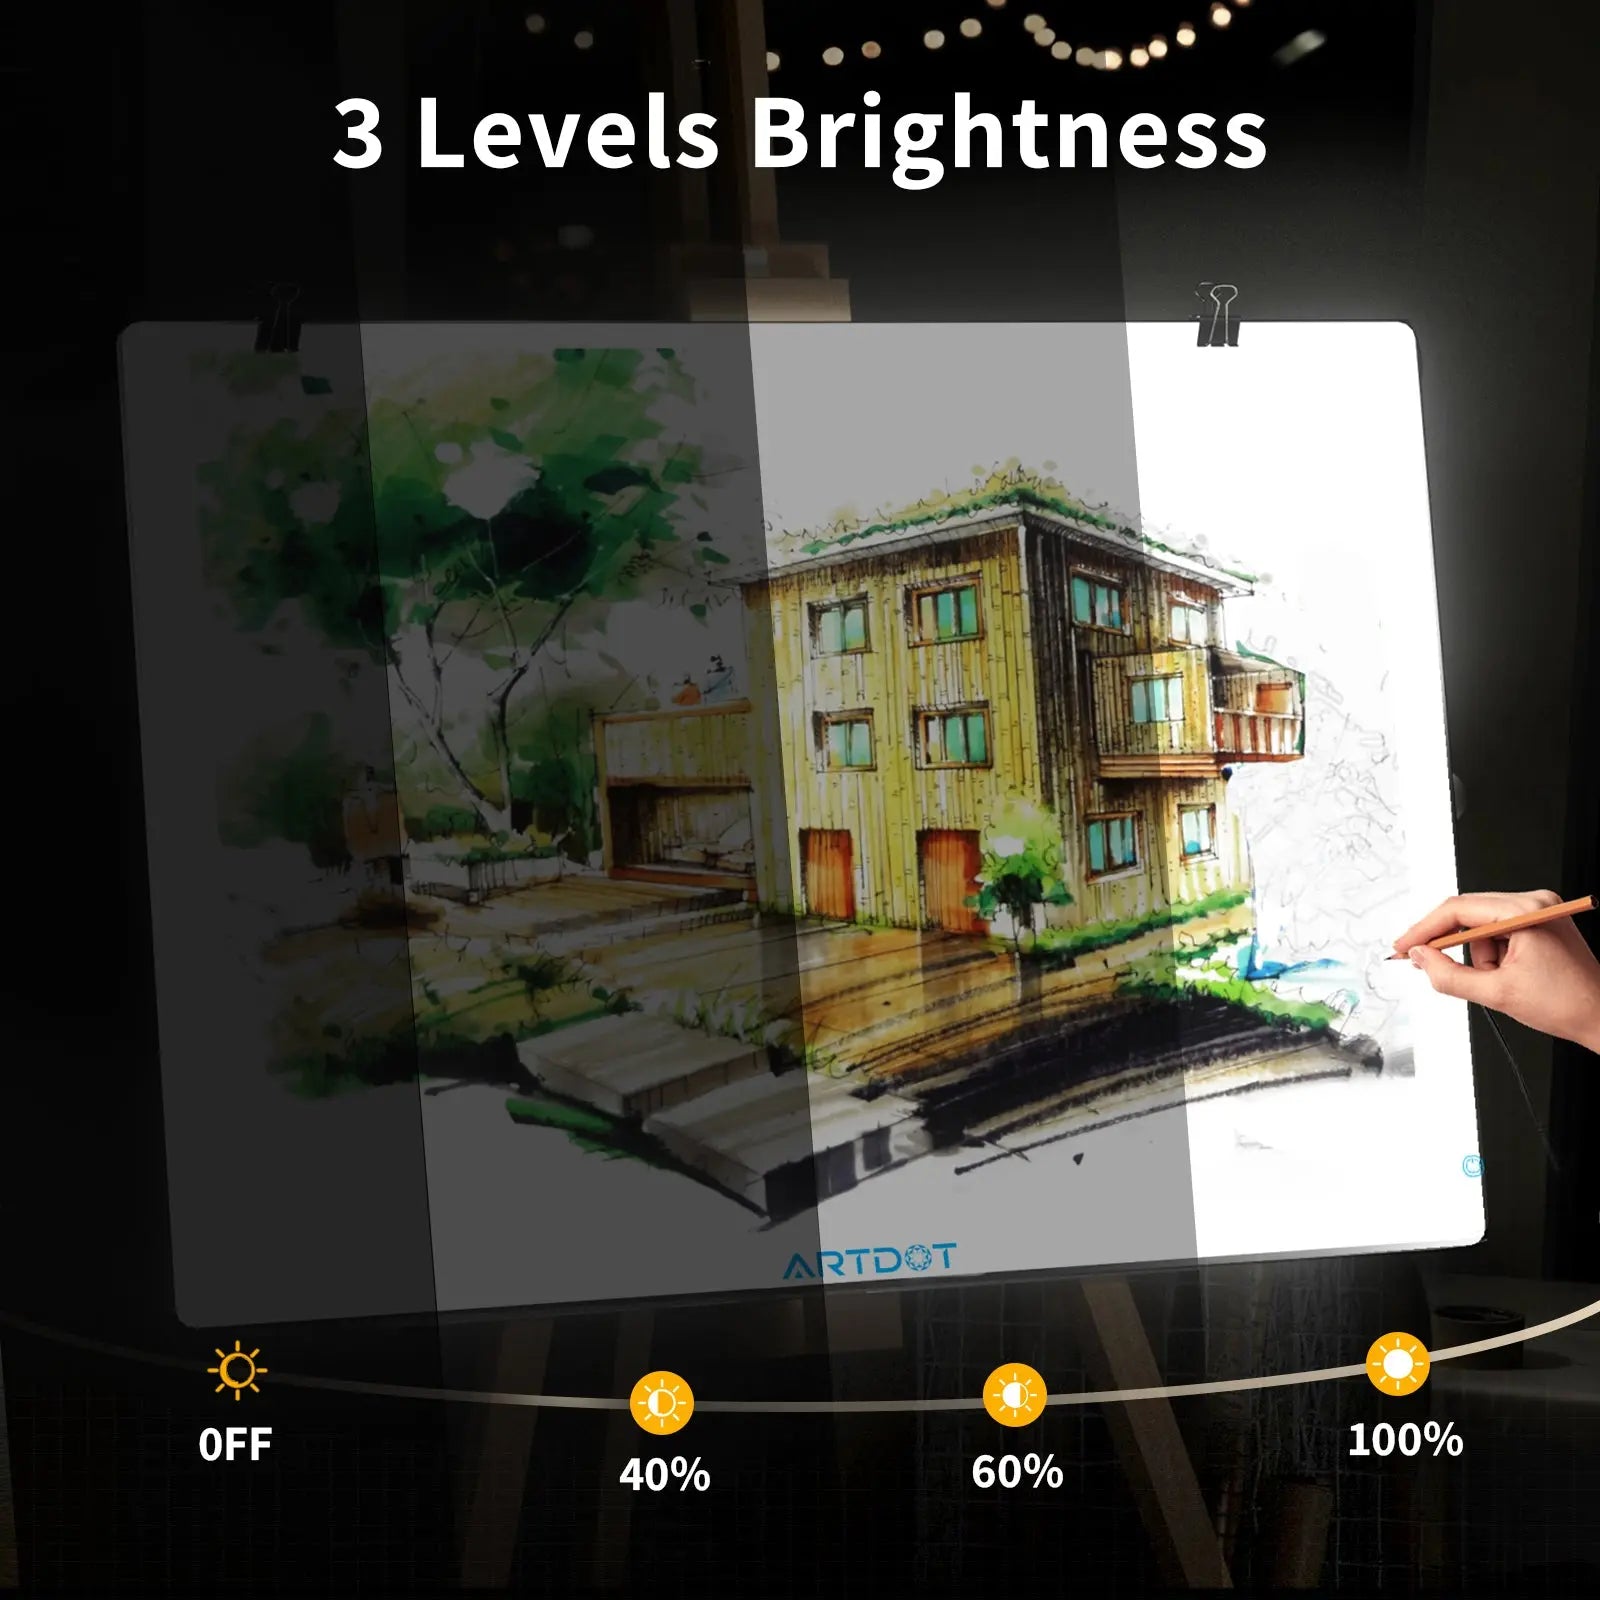  A4 LED Light Pad for Diamond Painting, USB Powered 3 Levels  Adjustable Brightness Light Board Kits with Detachable Stand and Clips (A4  LED Light Pad Kits F)